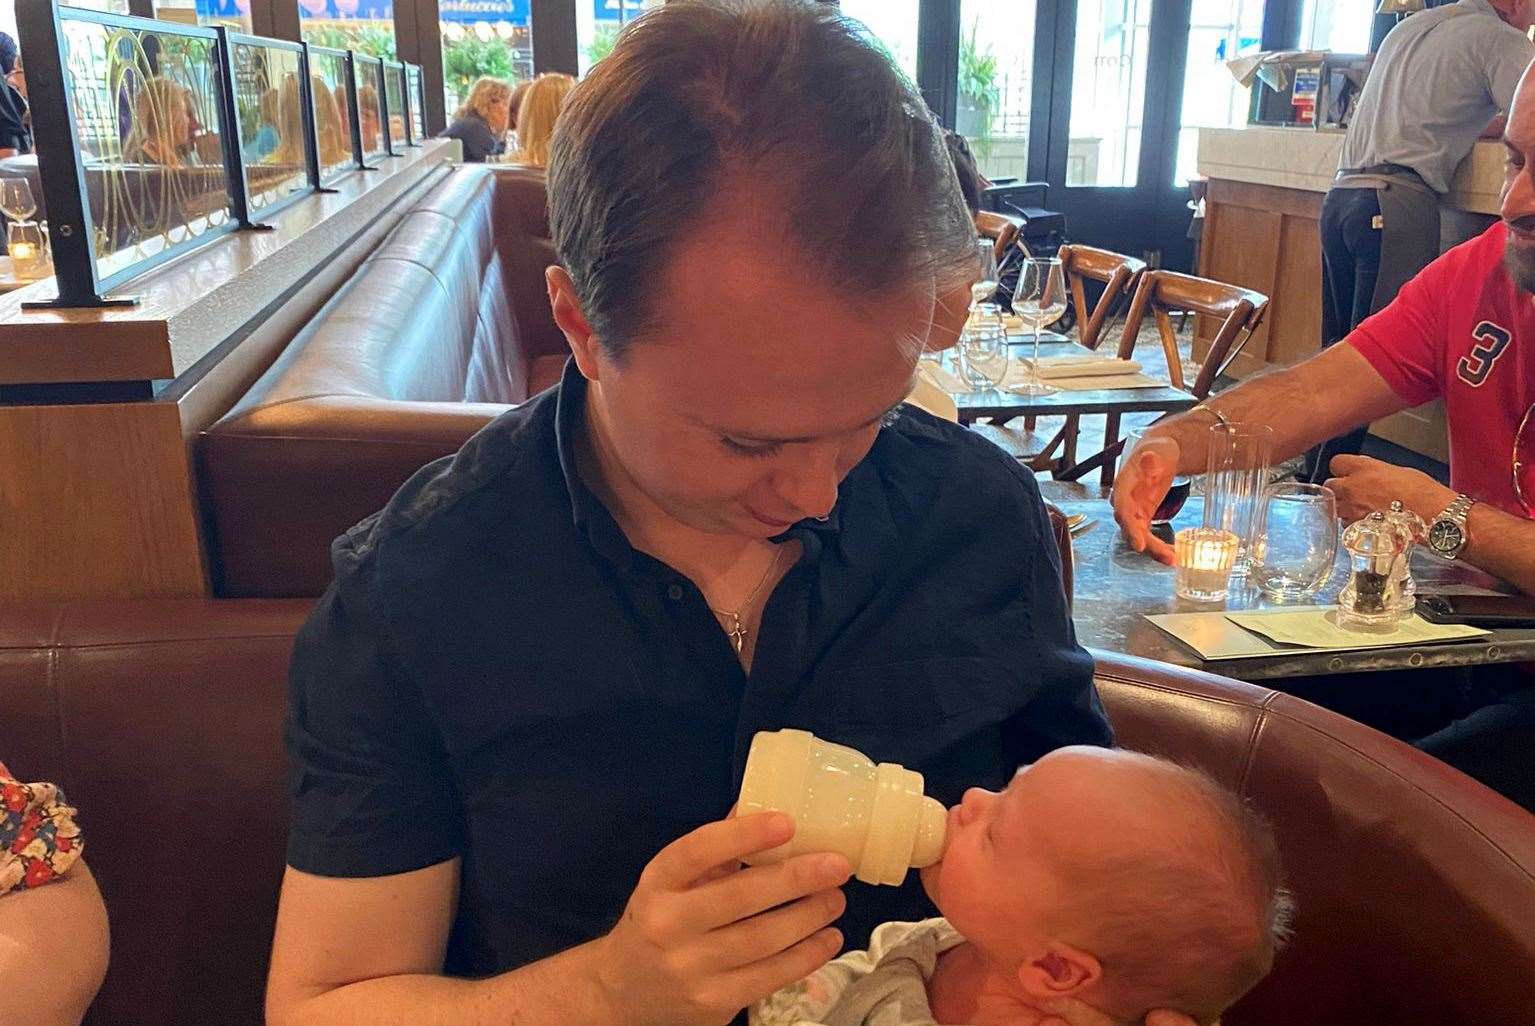 Alex Jee getting to grips with life as a new parent